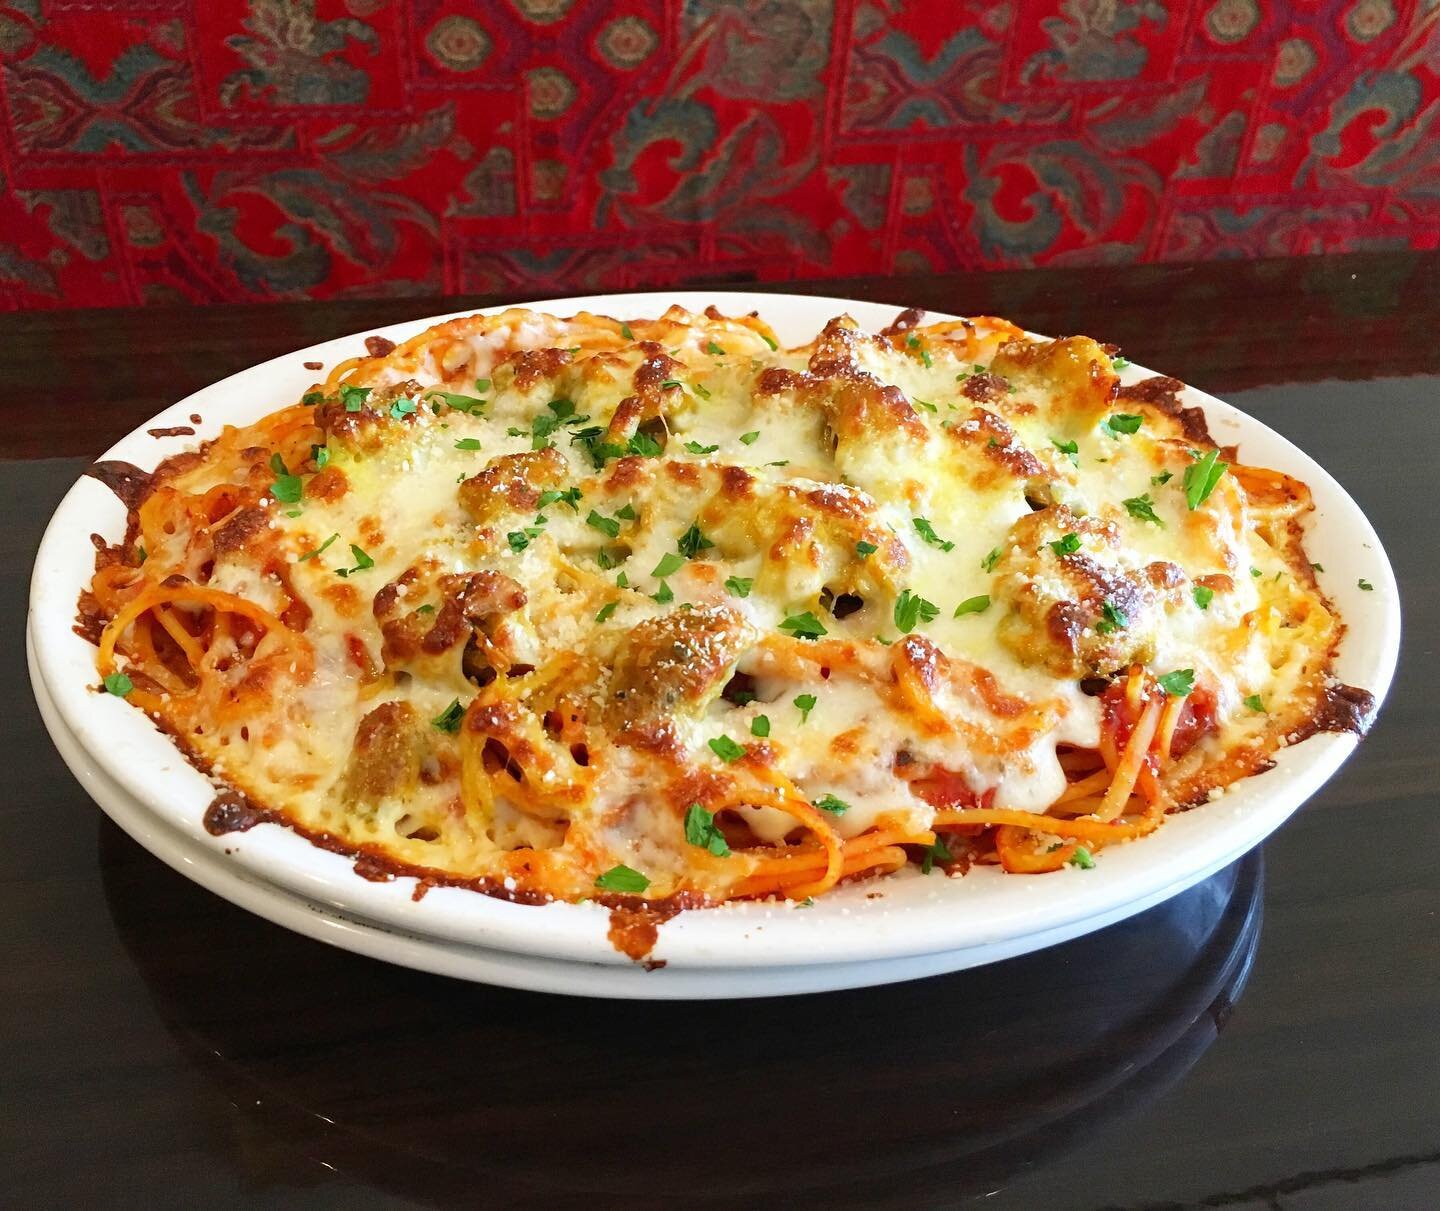 It is the perfect weather for our #ChickenParmesan! 🍝👌🏼 Grilled chicken served over linguini smothered with marinara and fresh mozzarella, then baked in the oven for that melted cheesy yummyness! You also get your choice of small salad or soup! #C